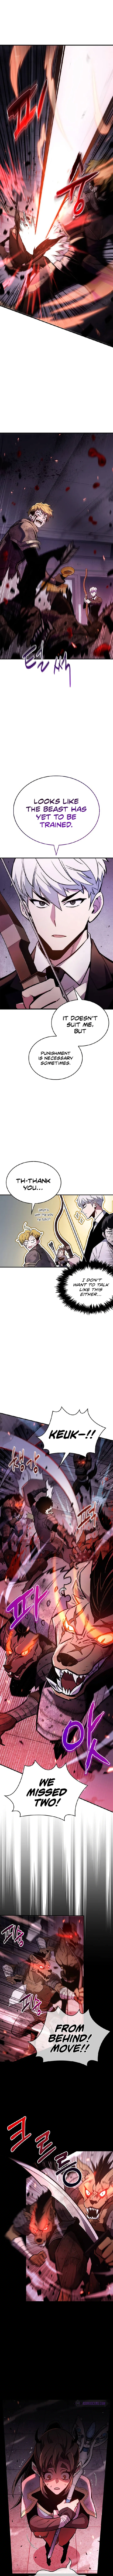 The Player Hides His Past - Chapter 2 Page 9